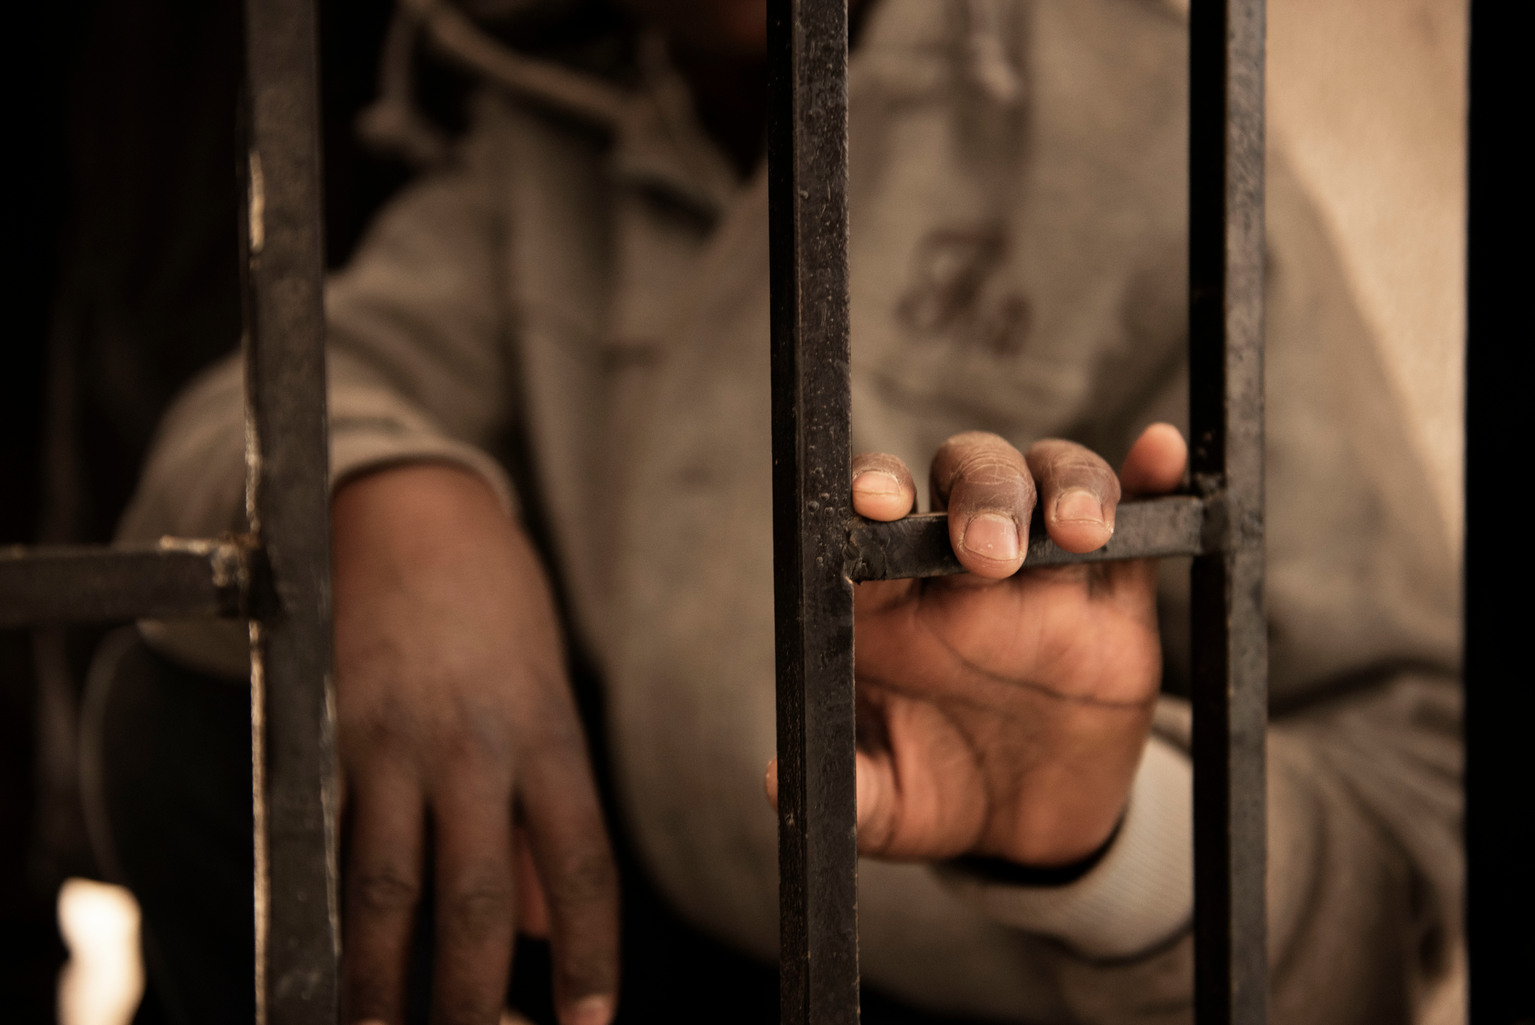 Fourteen-year-old Issaa, a migrant from Niger, rests his hand on a gate inside a detention centre, in Libya, Saturday 28 January 2017. Issaa, who has five younger others, said his mother died two years ago in Niger. I left Niger two and a half years ago, he says sitting on one of the dozens of dirty mattresses on the floor. My father collected money for my journey, he wished me good luck and then let me go. Once I arrived in Libya I started to look for a job.